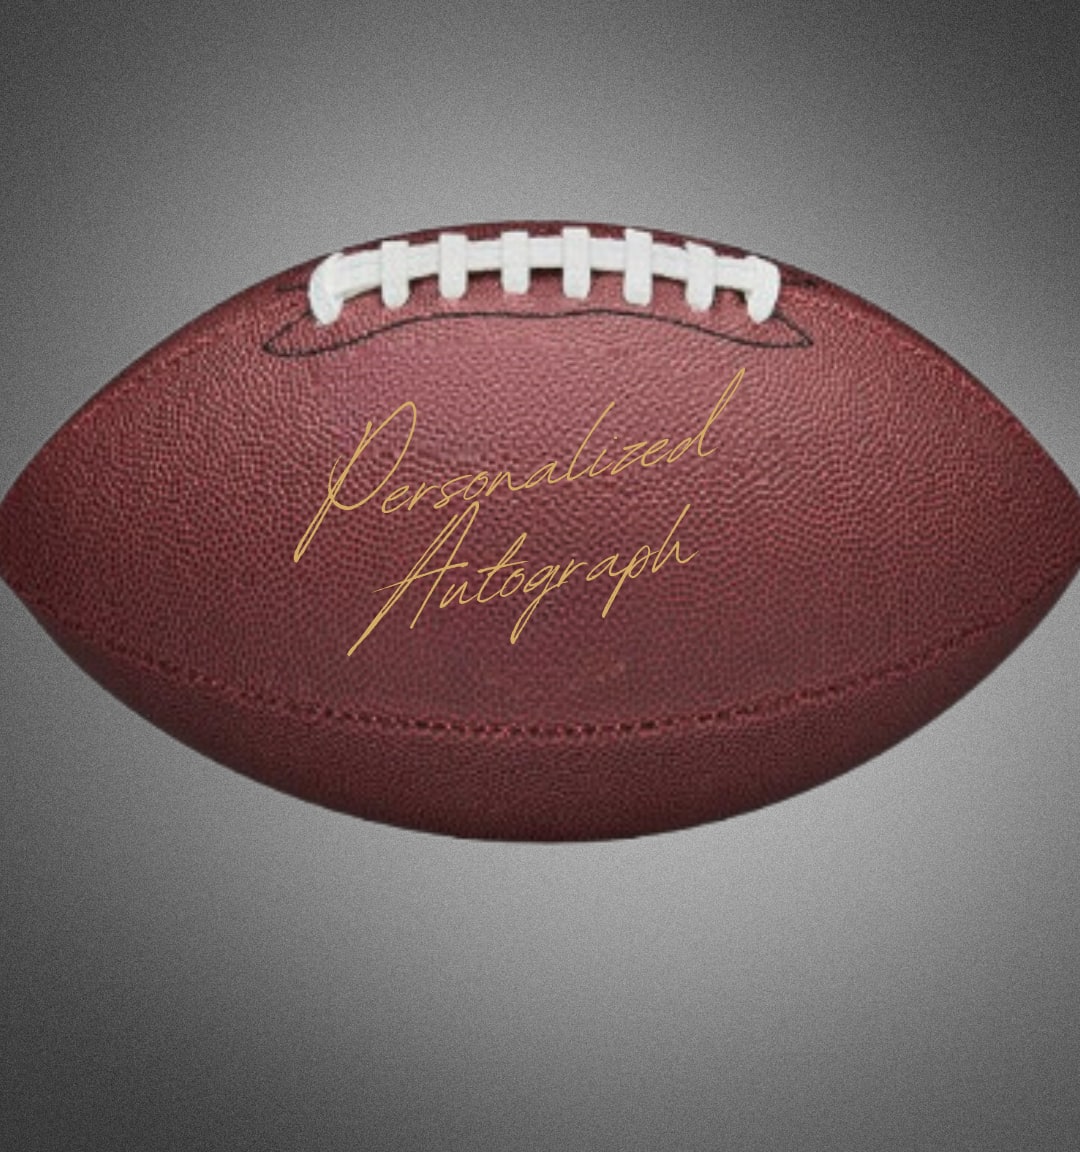 Limited Edition Mario Edwards Jr. Autographed Football